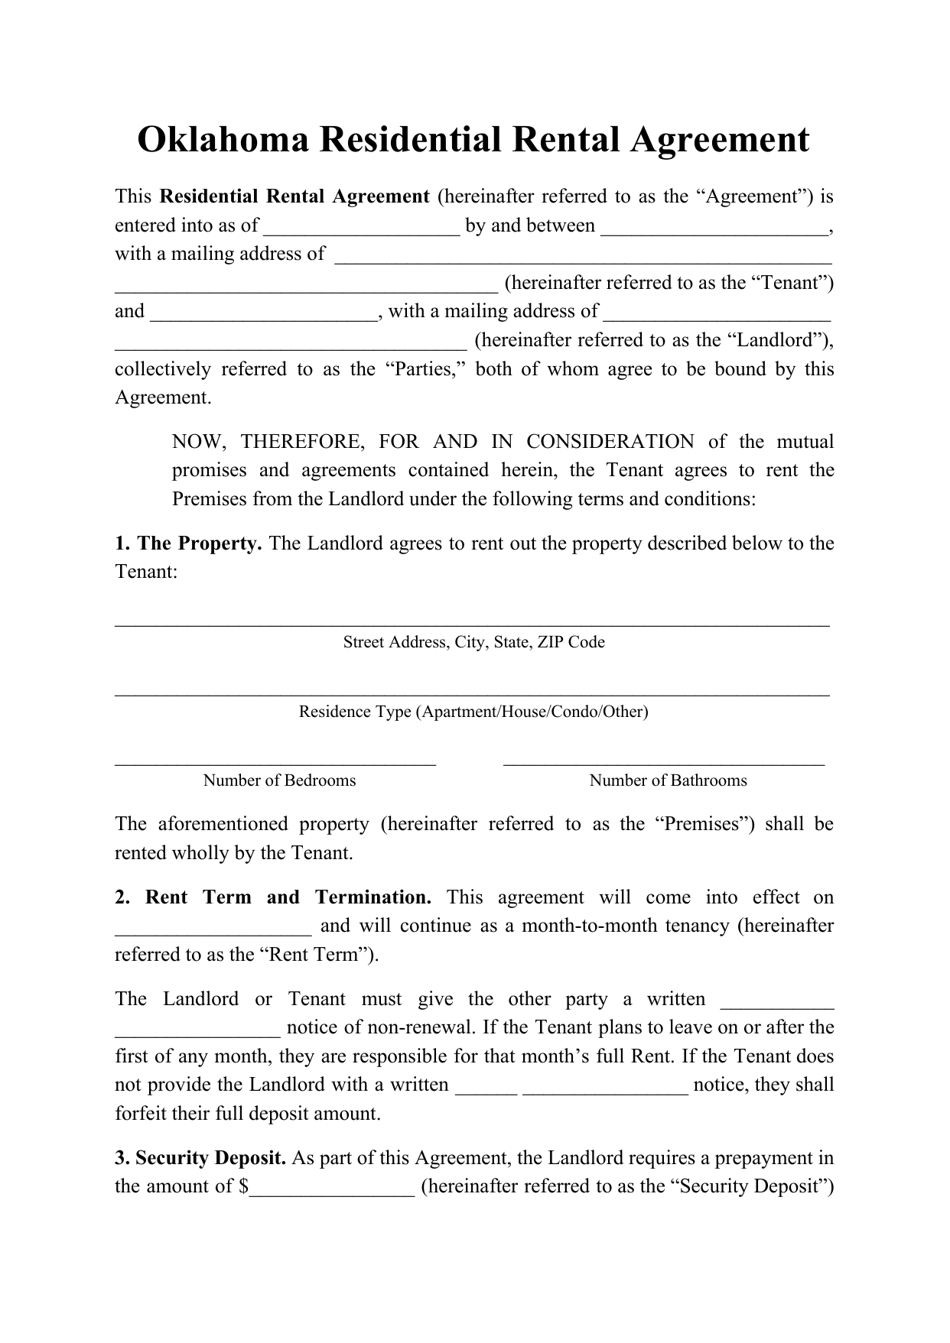 Residential Rental Agreement Template - Oklahoma, Page 1